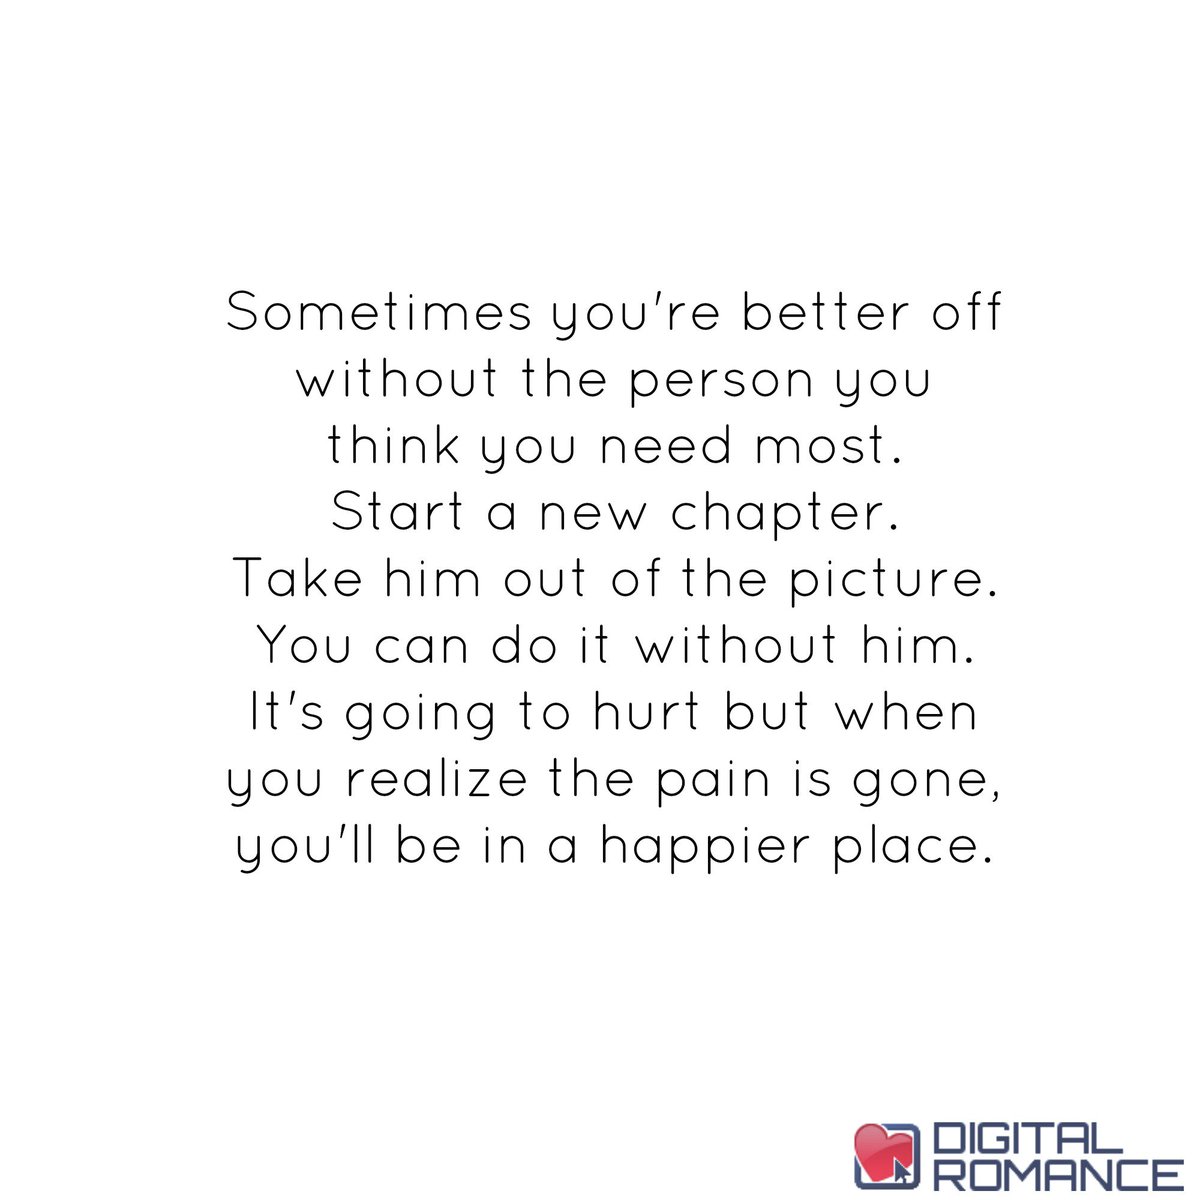 Digital Romance Inc On Twitter: "Sometimes You're Better Off Without The Person You Think You Need Most. Start A New Chapter. Take Him Out... #Relationships #Quotes Https://T.co/Bqhvvd5Mtu" / Twitter